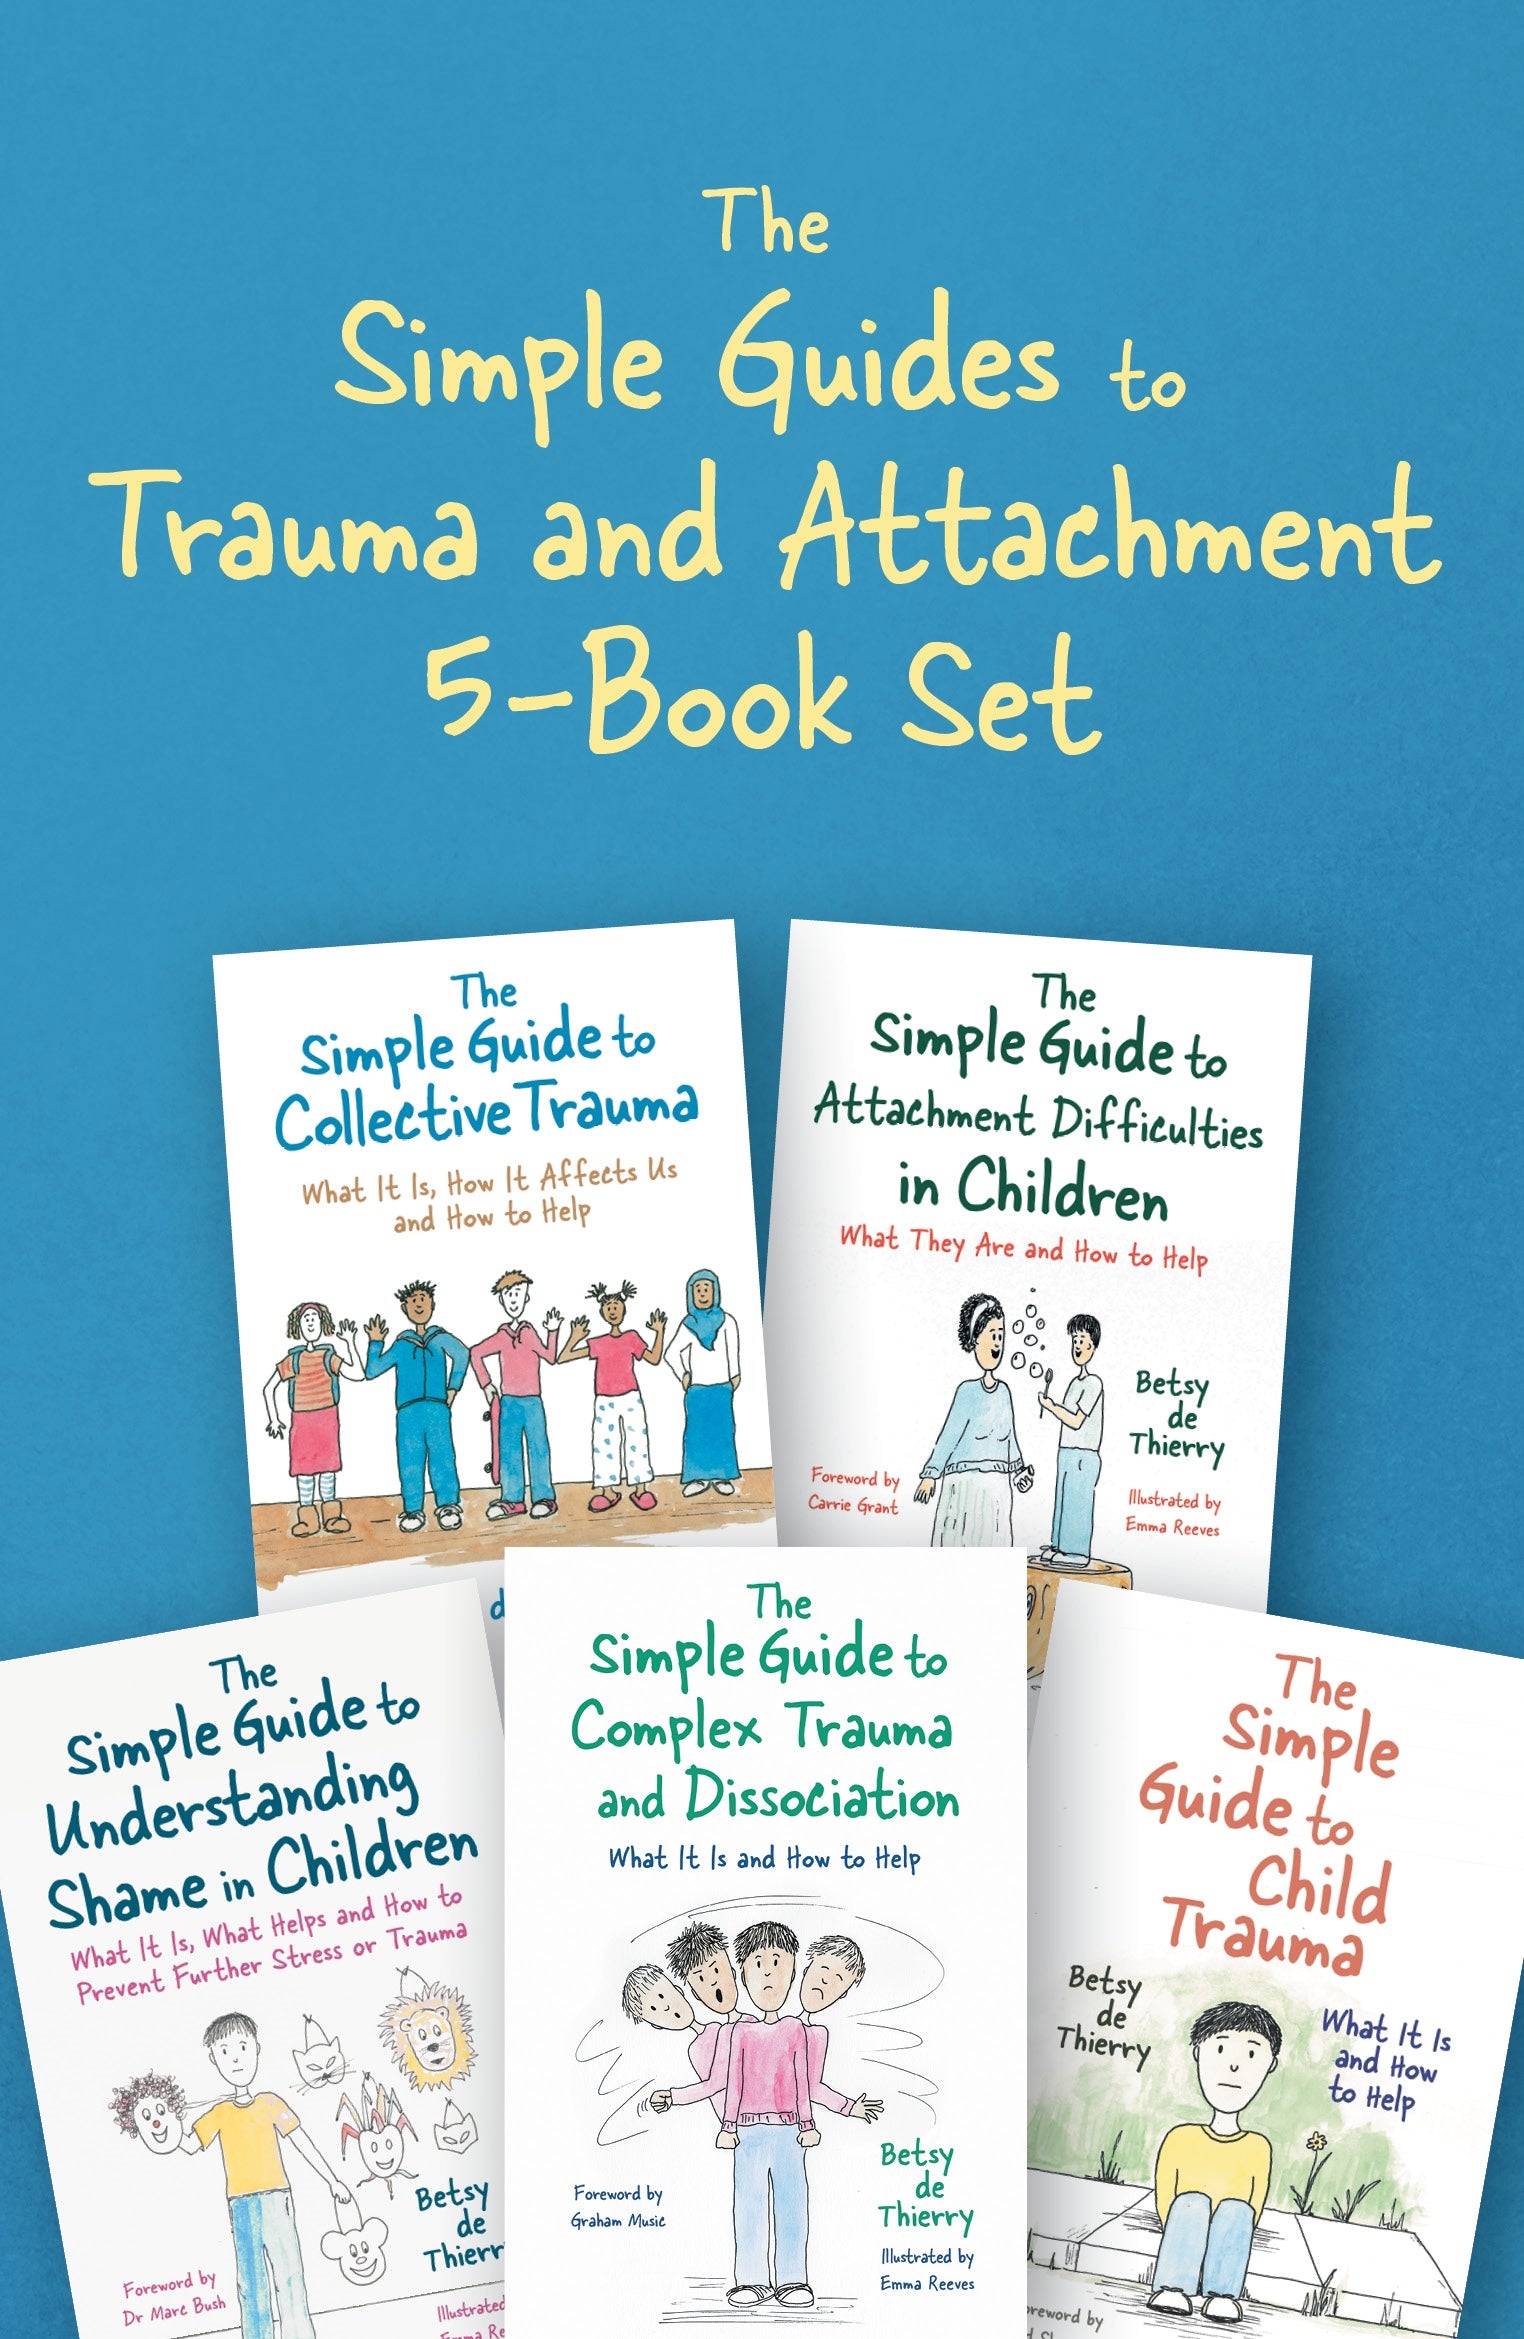 The Simple Guides to Trauma and Attachment 5-Book Set by Betsy de Thierry, Emma Reeves